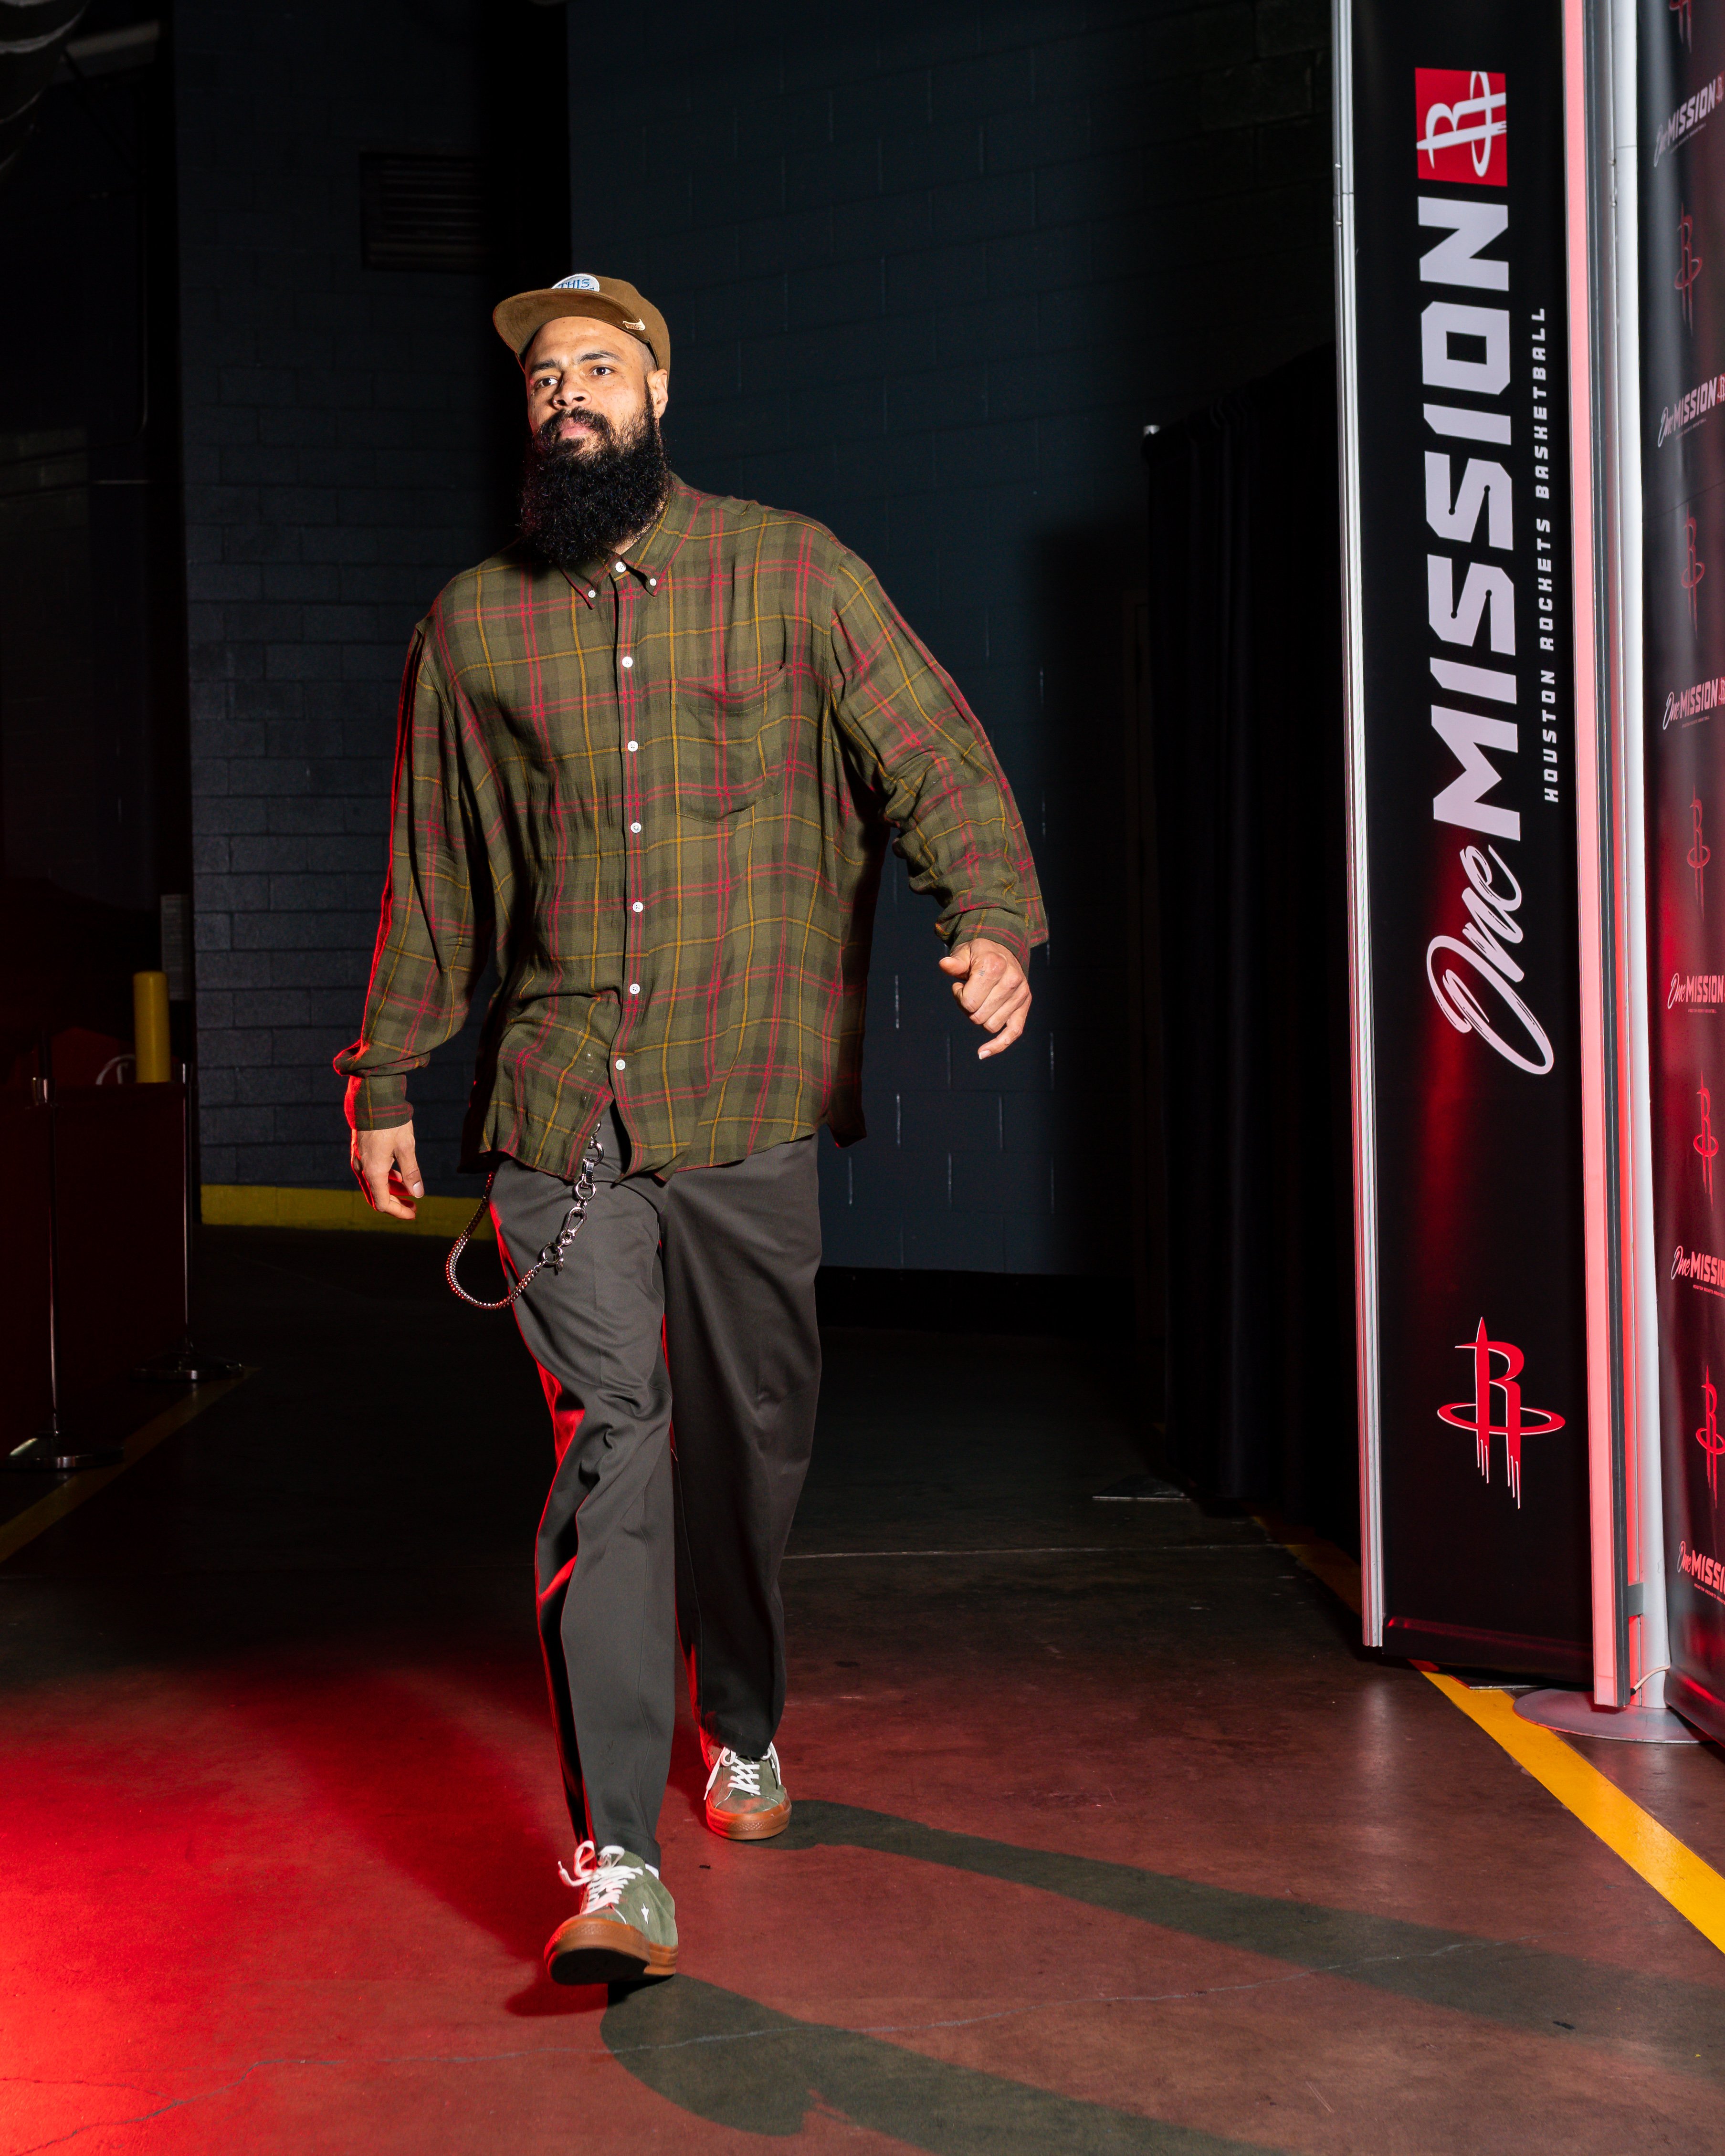 Tyson Chandler #19 of the Houston Rockets arrives to the game against the Charlotte Hornets on February 04, 2020 | Photo: Getty Images